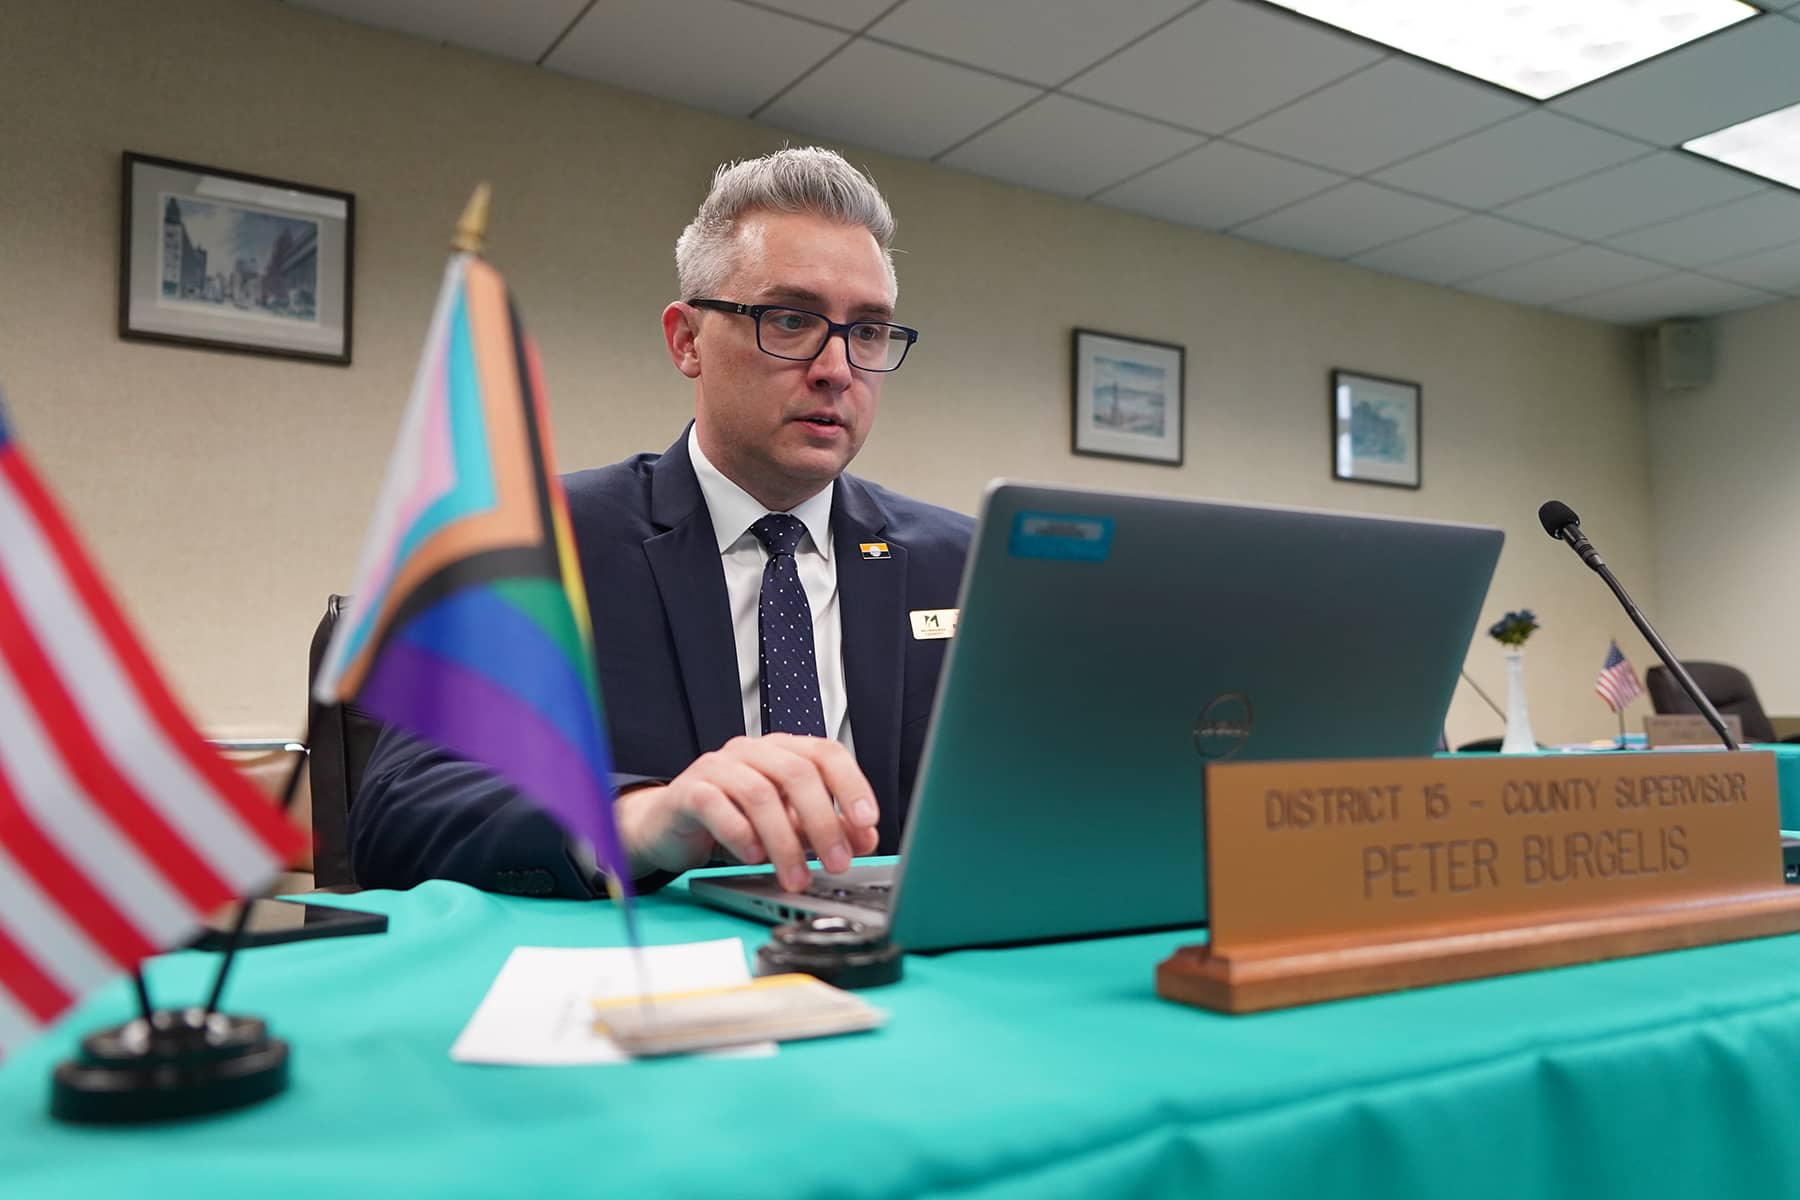 Milwaukee County’s first openly LGBTQ+ county supervisor Peter Burgelis says an assailant called him a gay slur and then punched him in the face this week at a suburban mall.